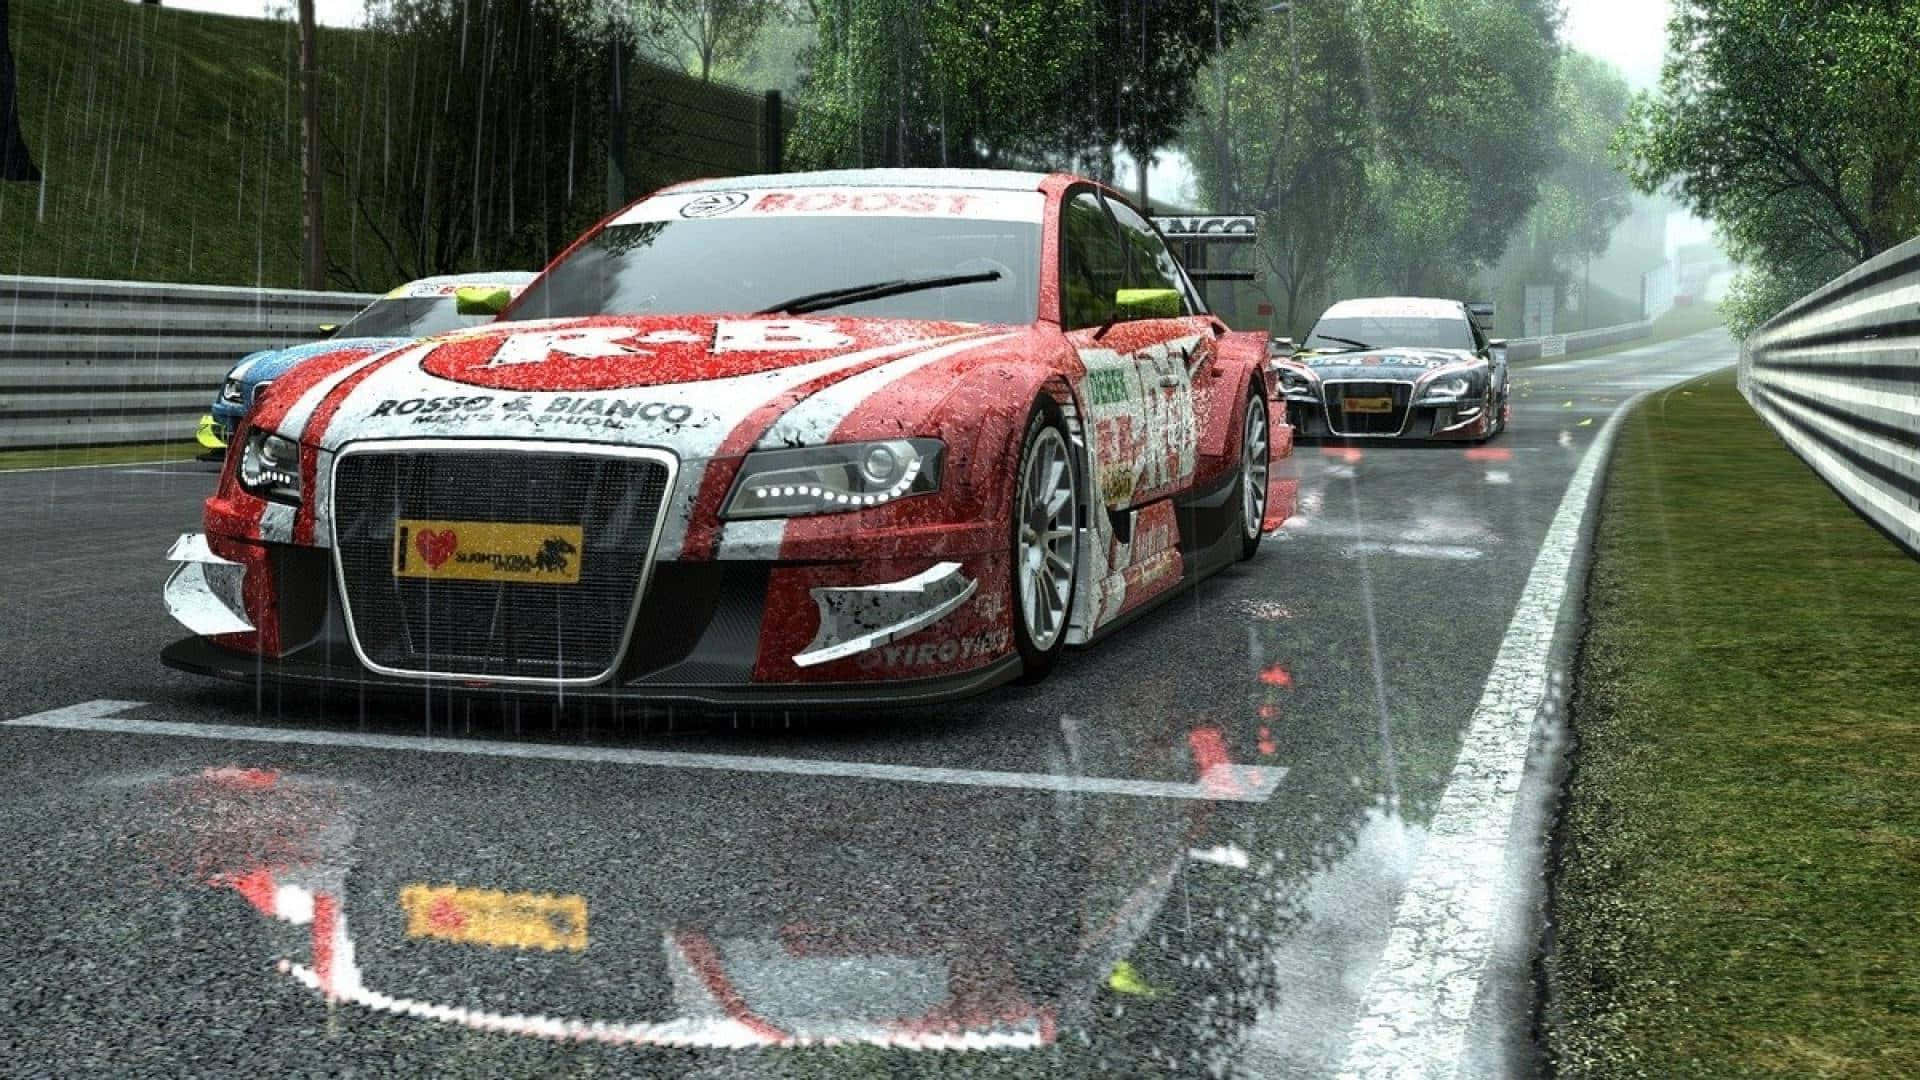 A driver competes in Project Cars on a prominent race track.